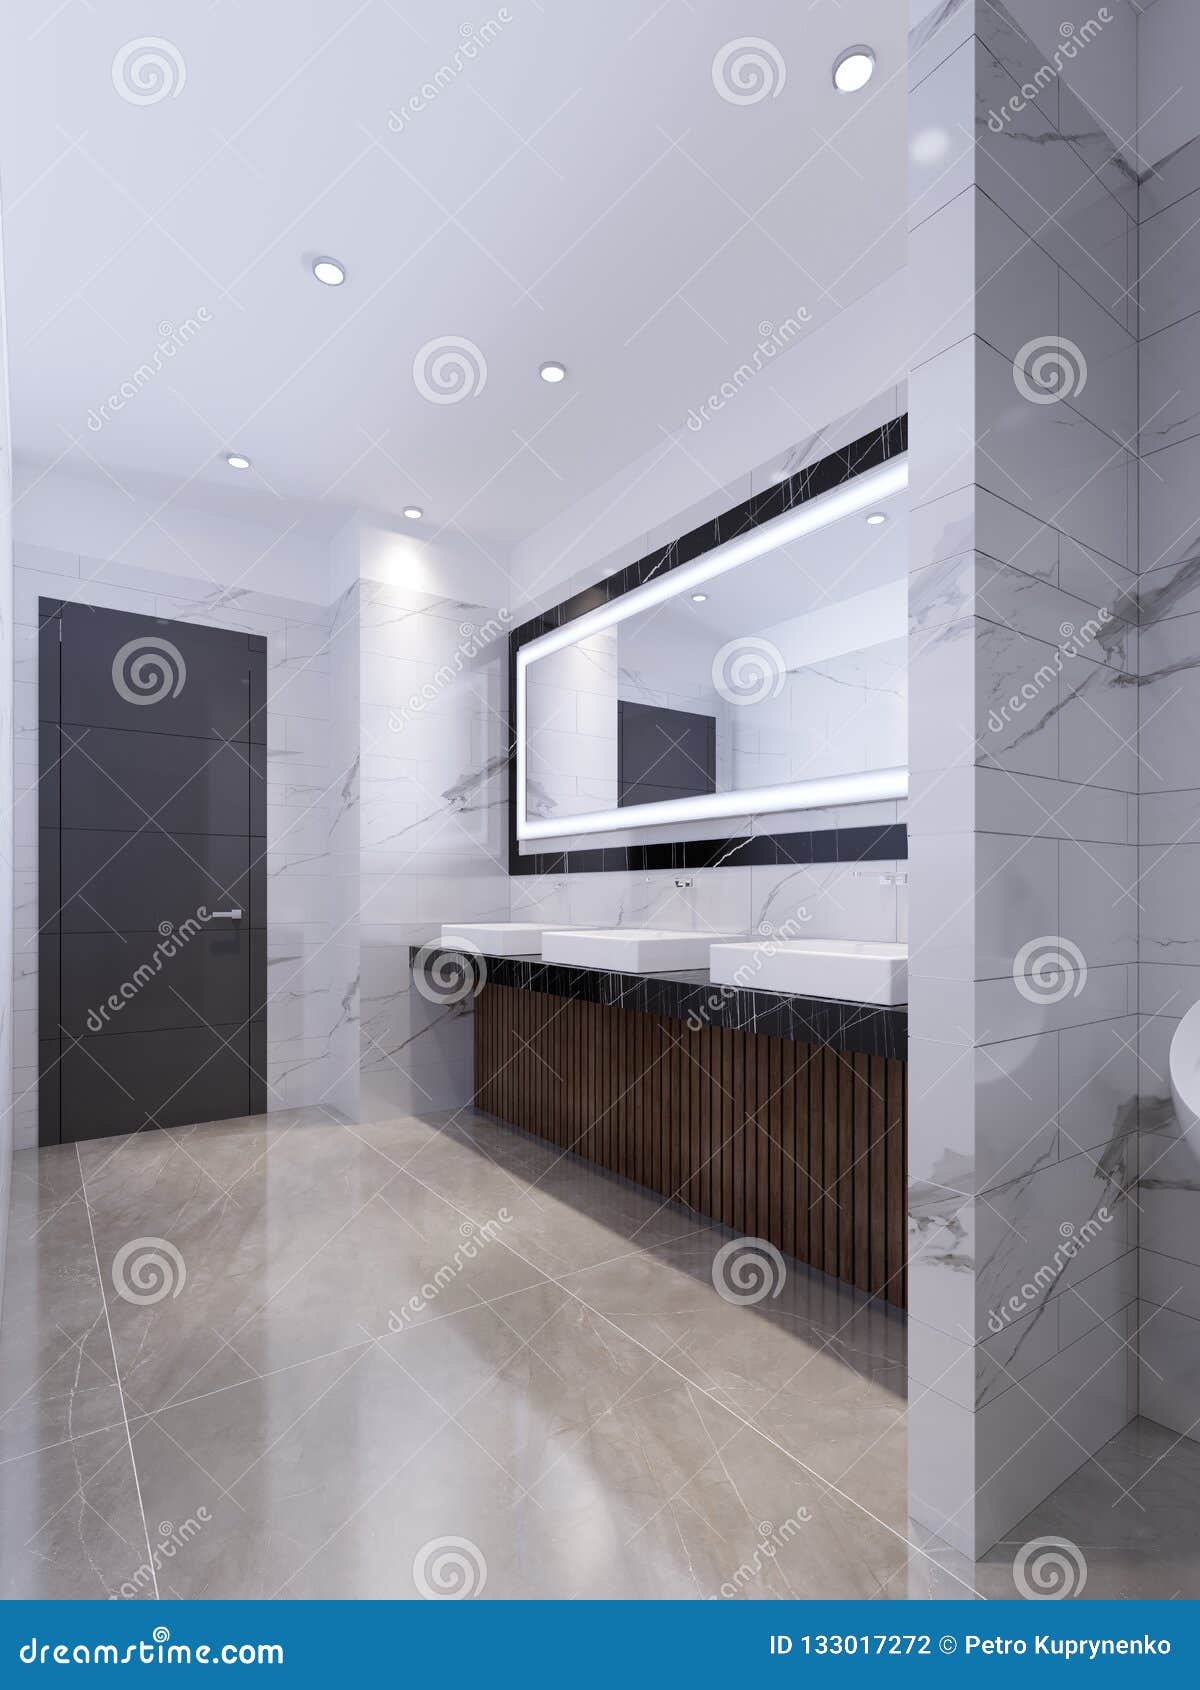 Three Sinks on the Marble Black Countertop and a Large Mirror in the ...